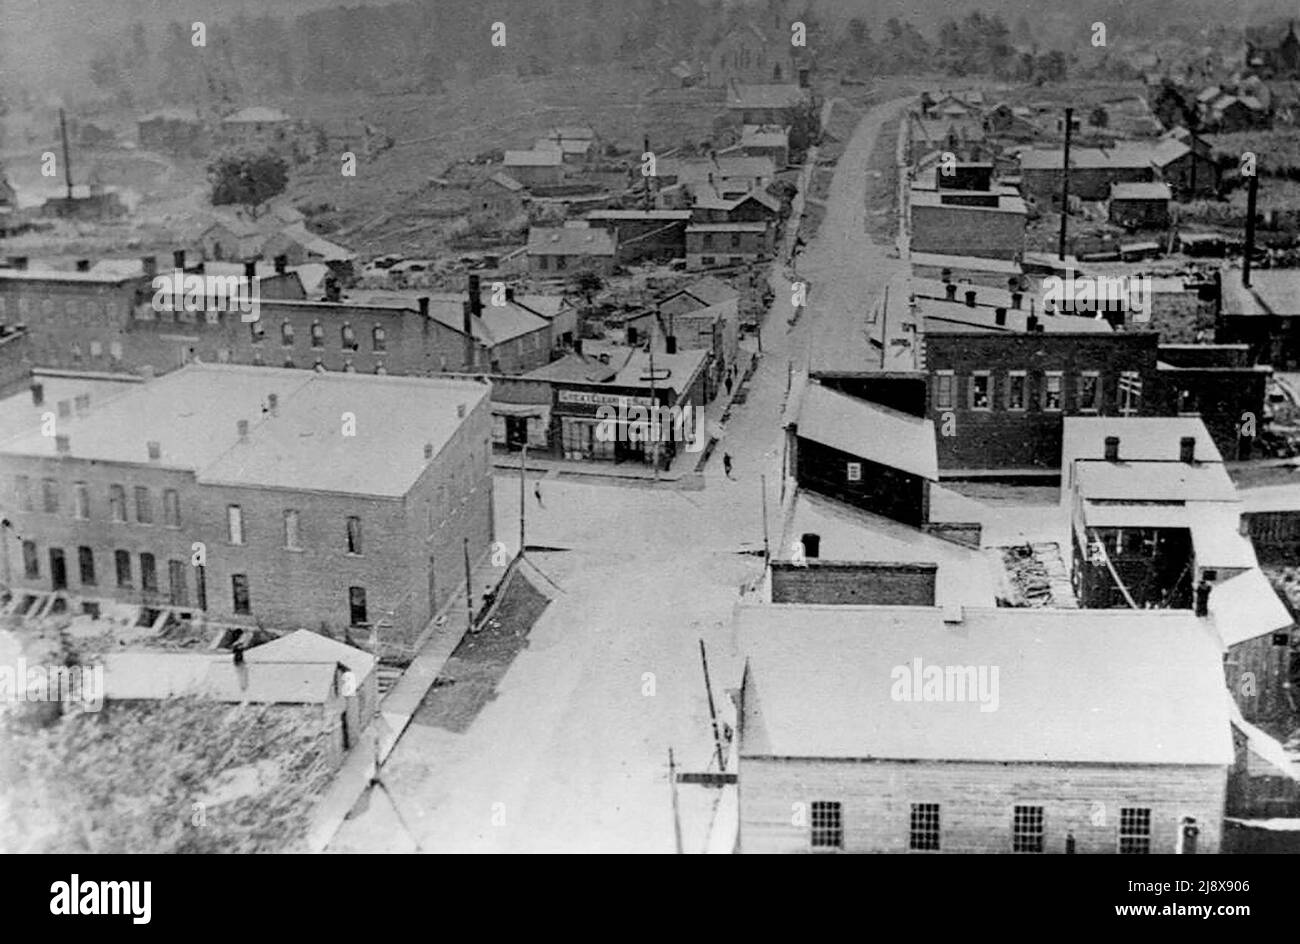 Photograph taken from the tower of the Methodist church shows the main intersection in Madoc Village, Ontario.  The view is looking west towards the Presbyterian church.  Bristol's Planning Mill is in the foreground on the right  ca.  1880 Stock Photo